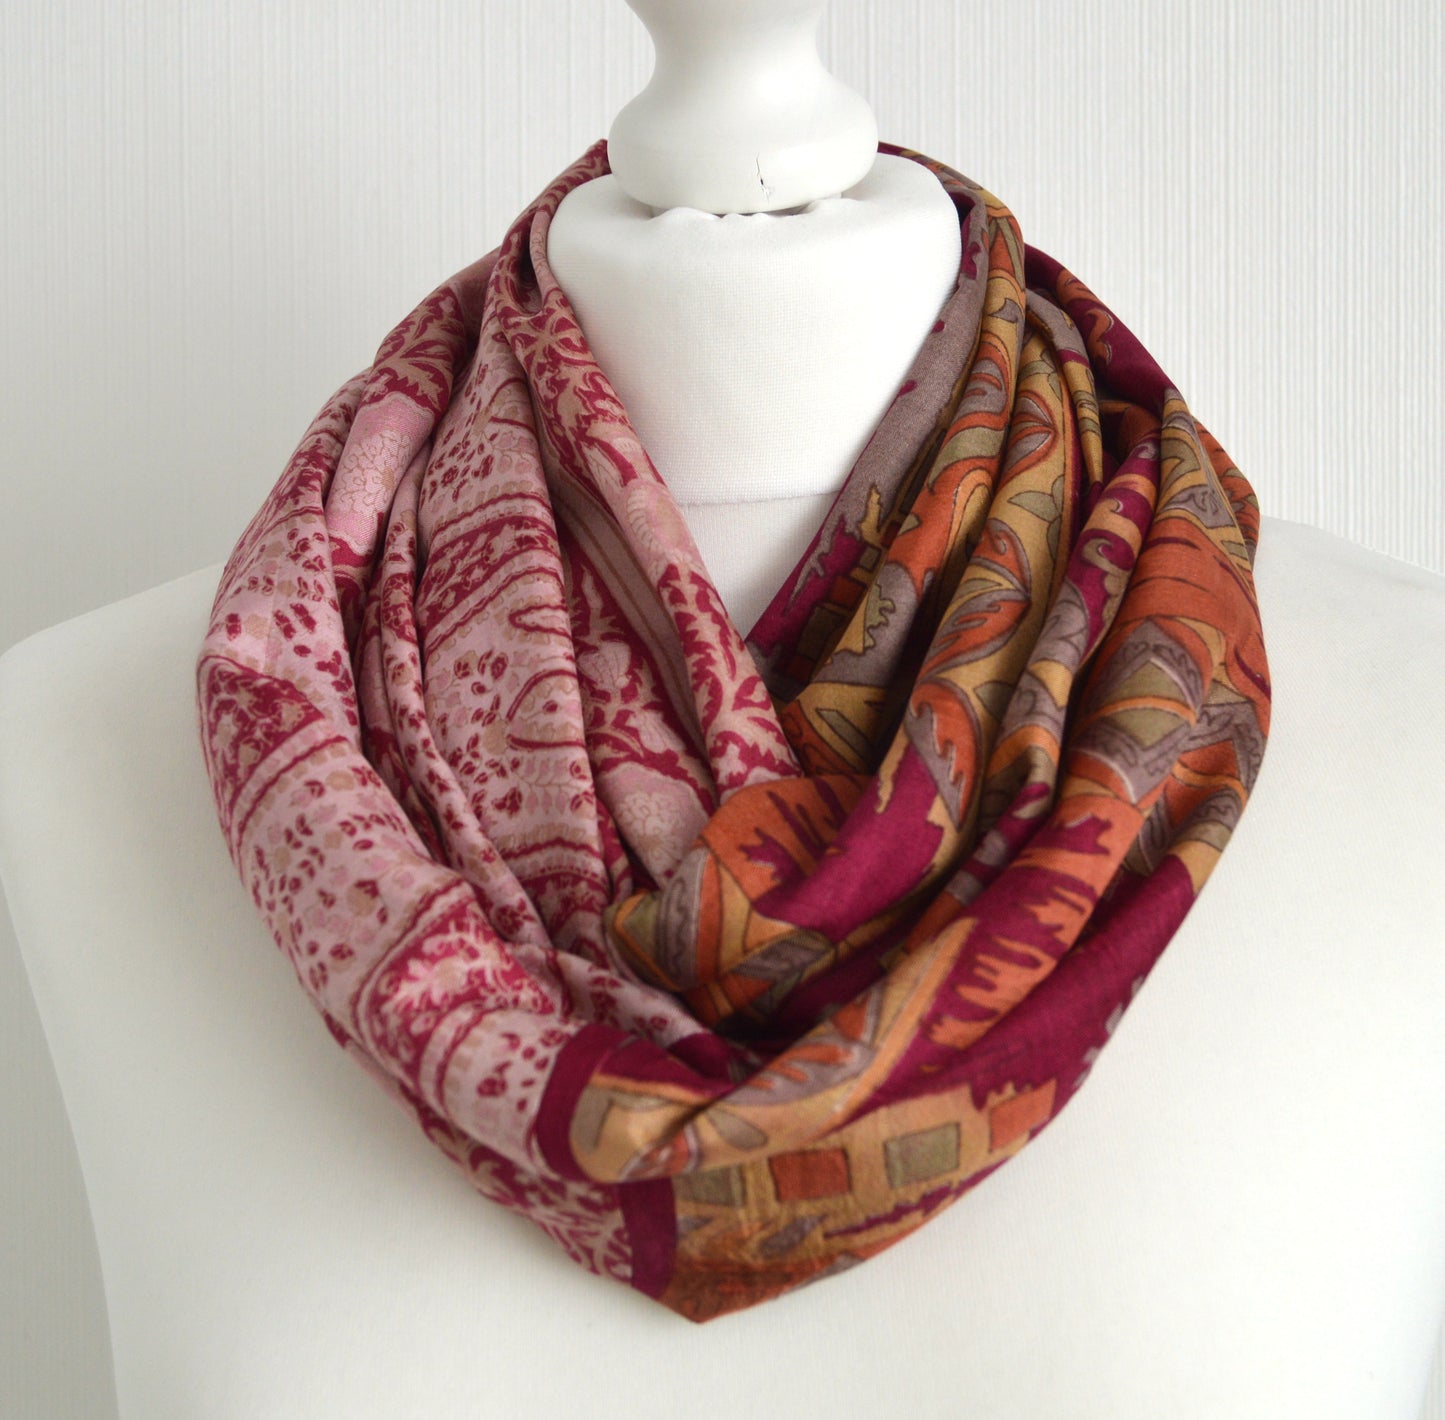 Red Beige Floral Two Tone Sari Silk Infinity Scarf - Boho Eco Friendly Gift For Her - Unique Sophisticated Bohemian Autumn Fall Winter Scarf